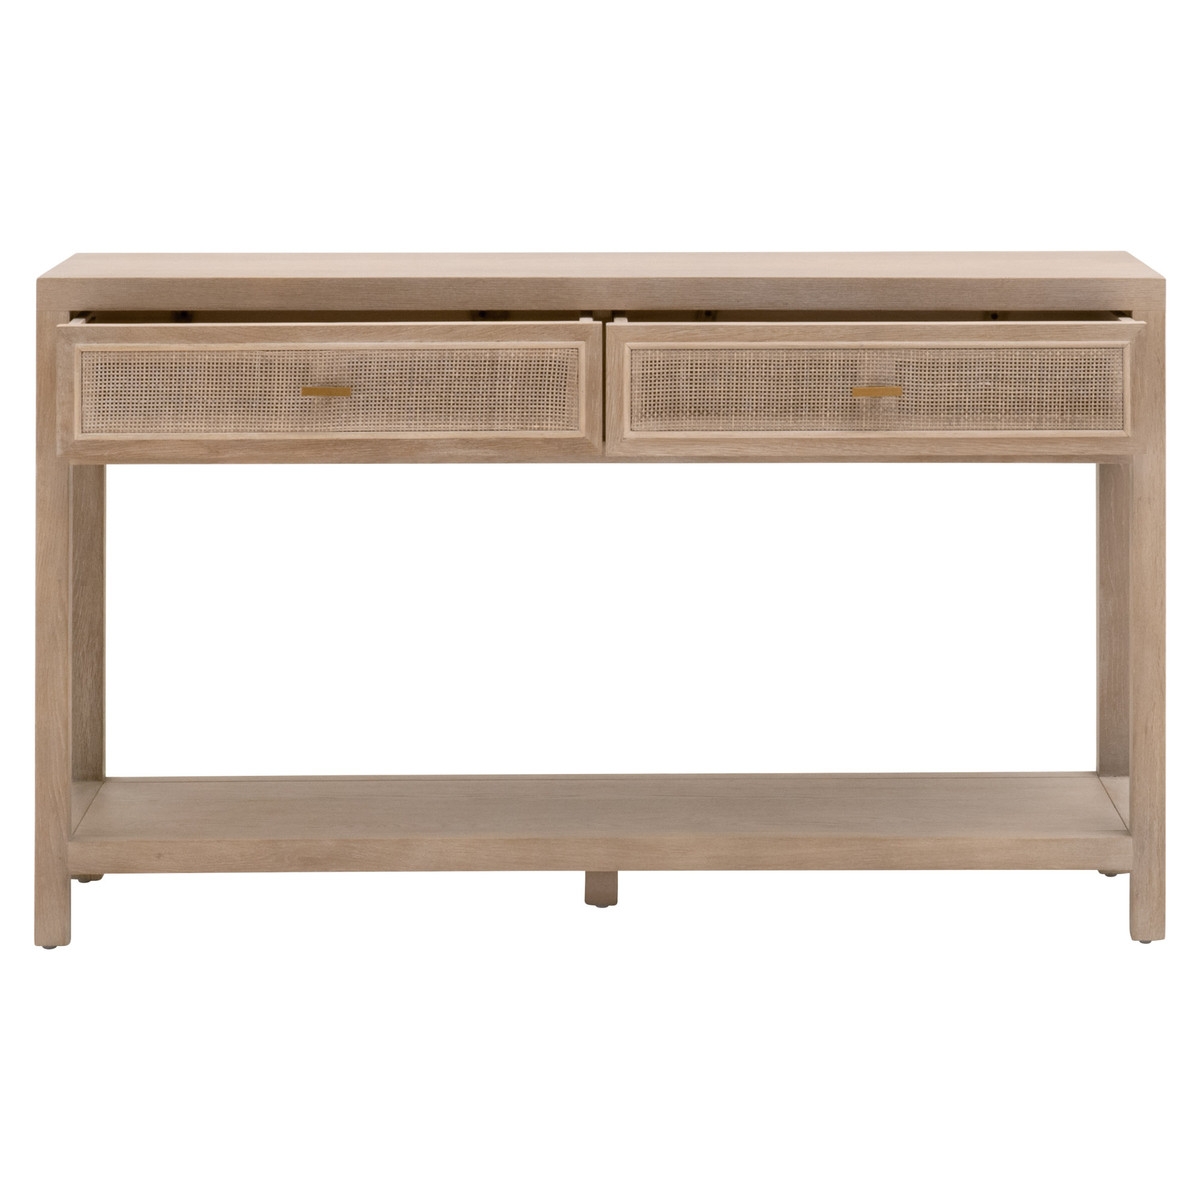 Cane 2-Drawer Entry Console - Image 1